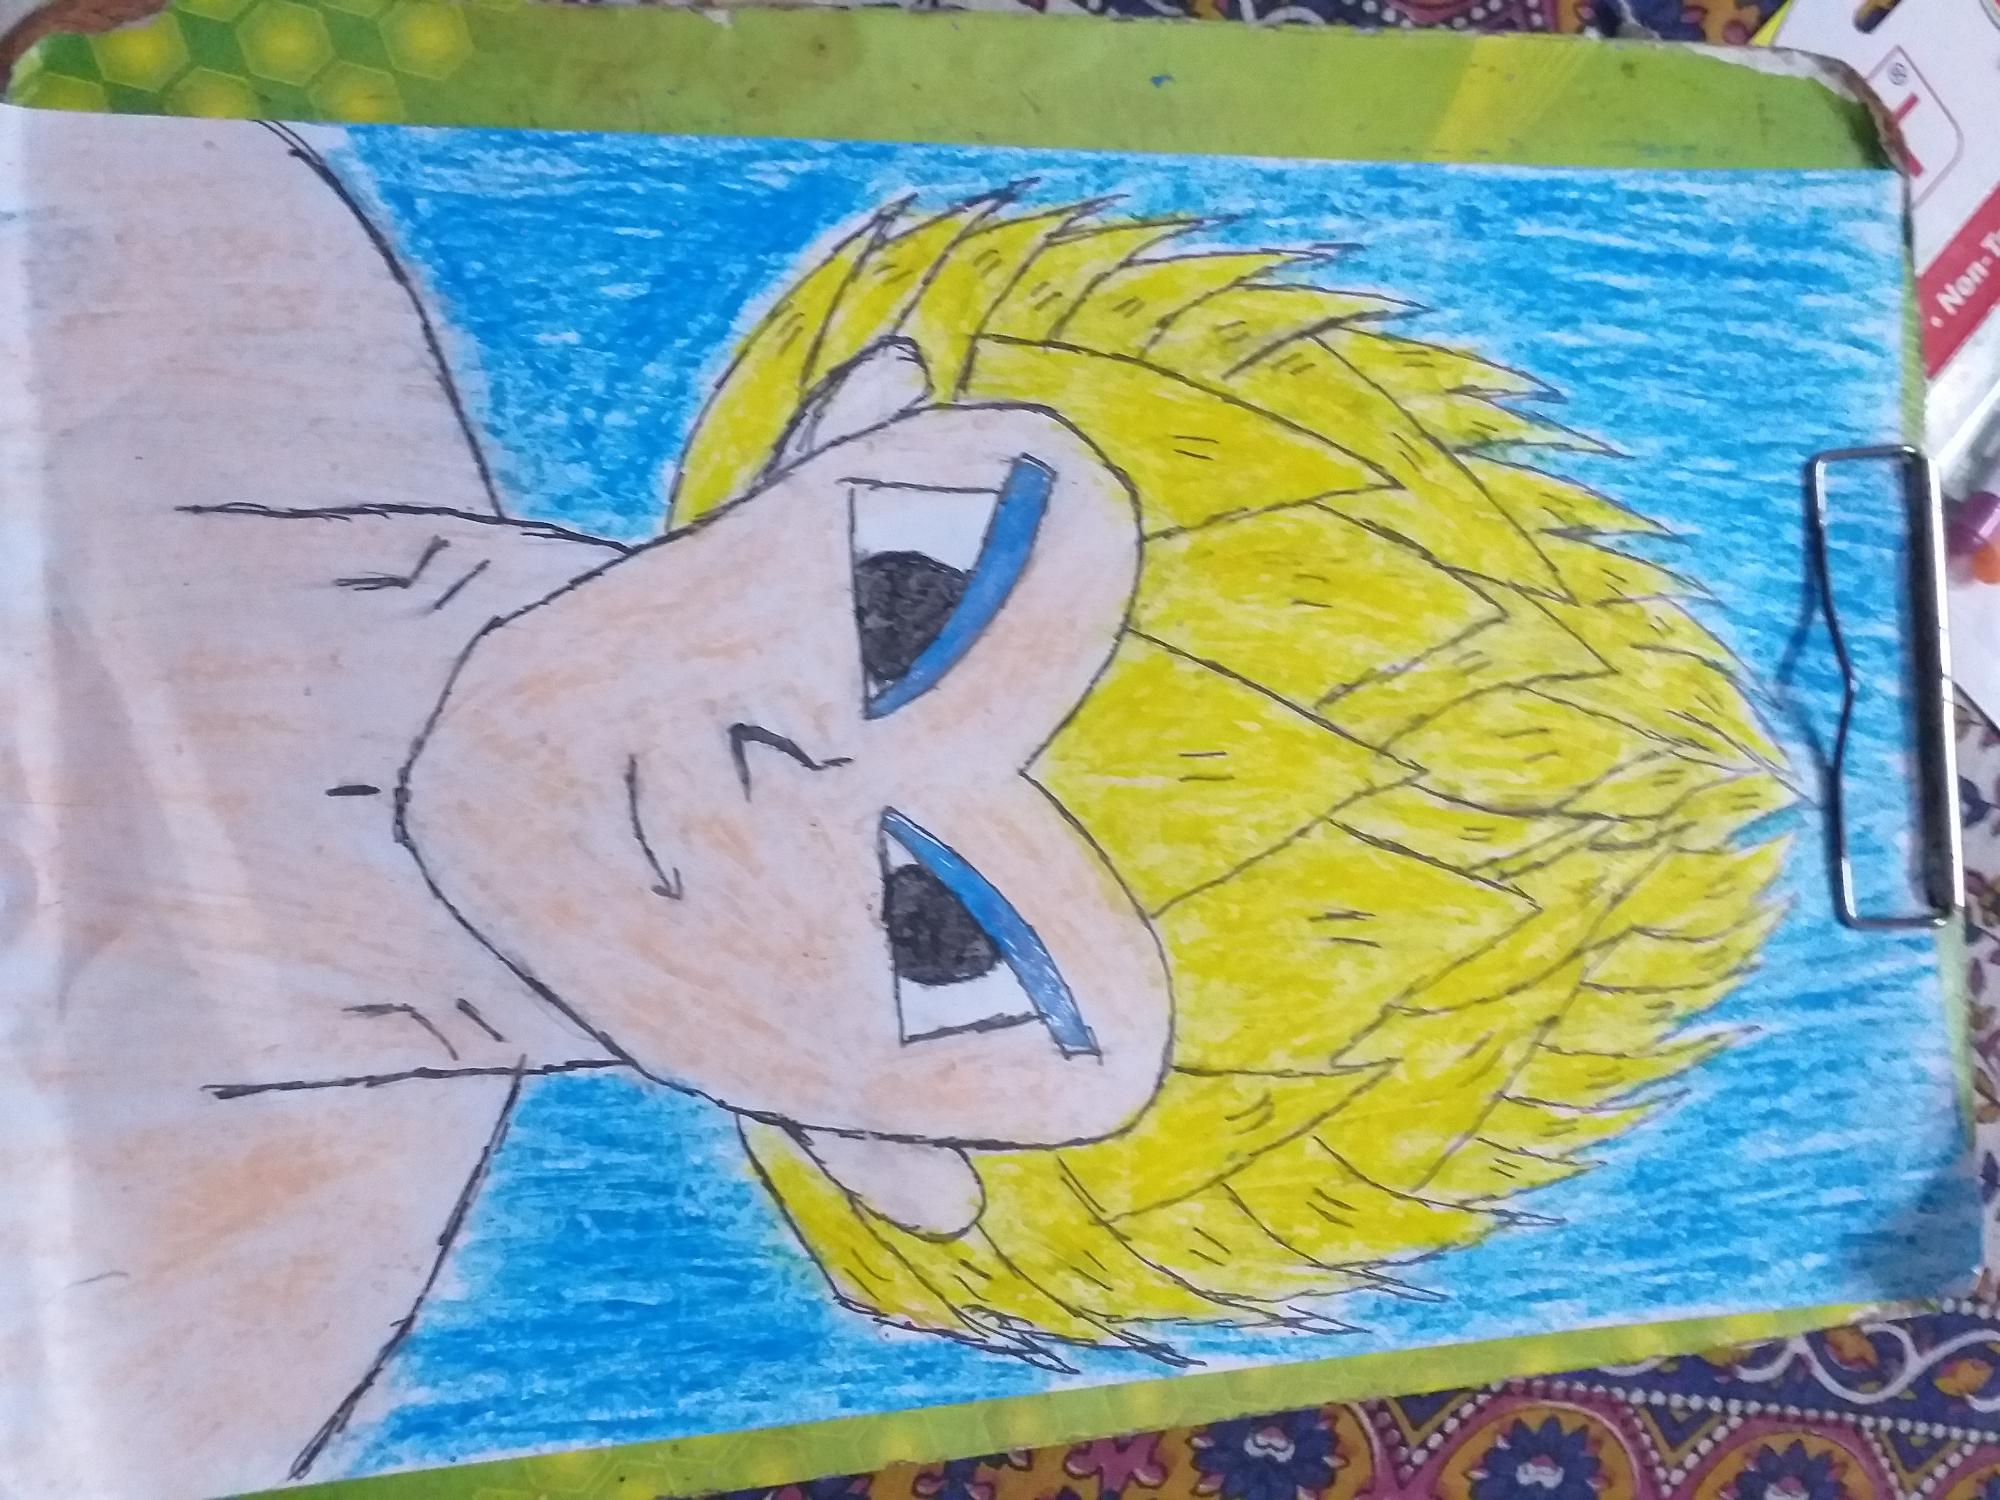 Its My First Drawing Of Vegeta Super Saiyan So Hows This